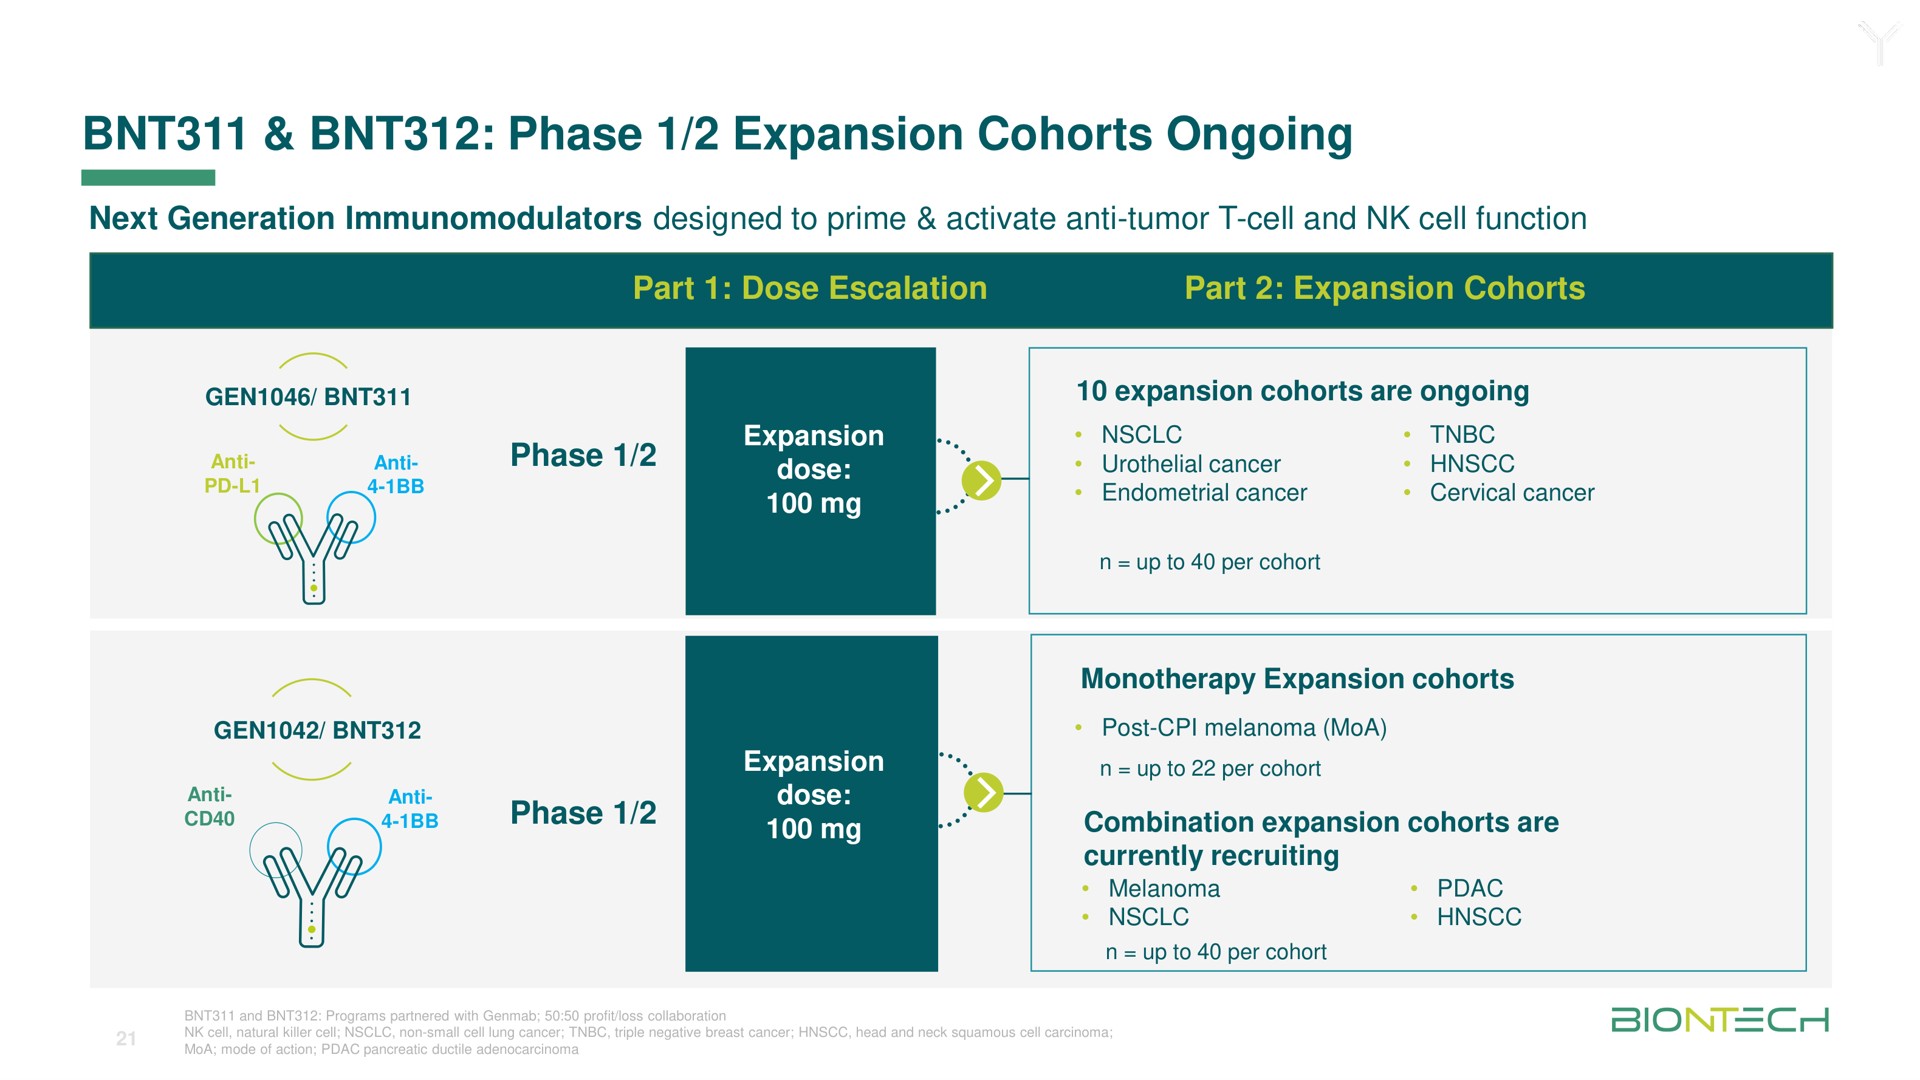 phase expansion cohorts ongoing | BioNTech